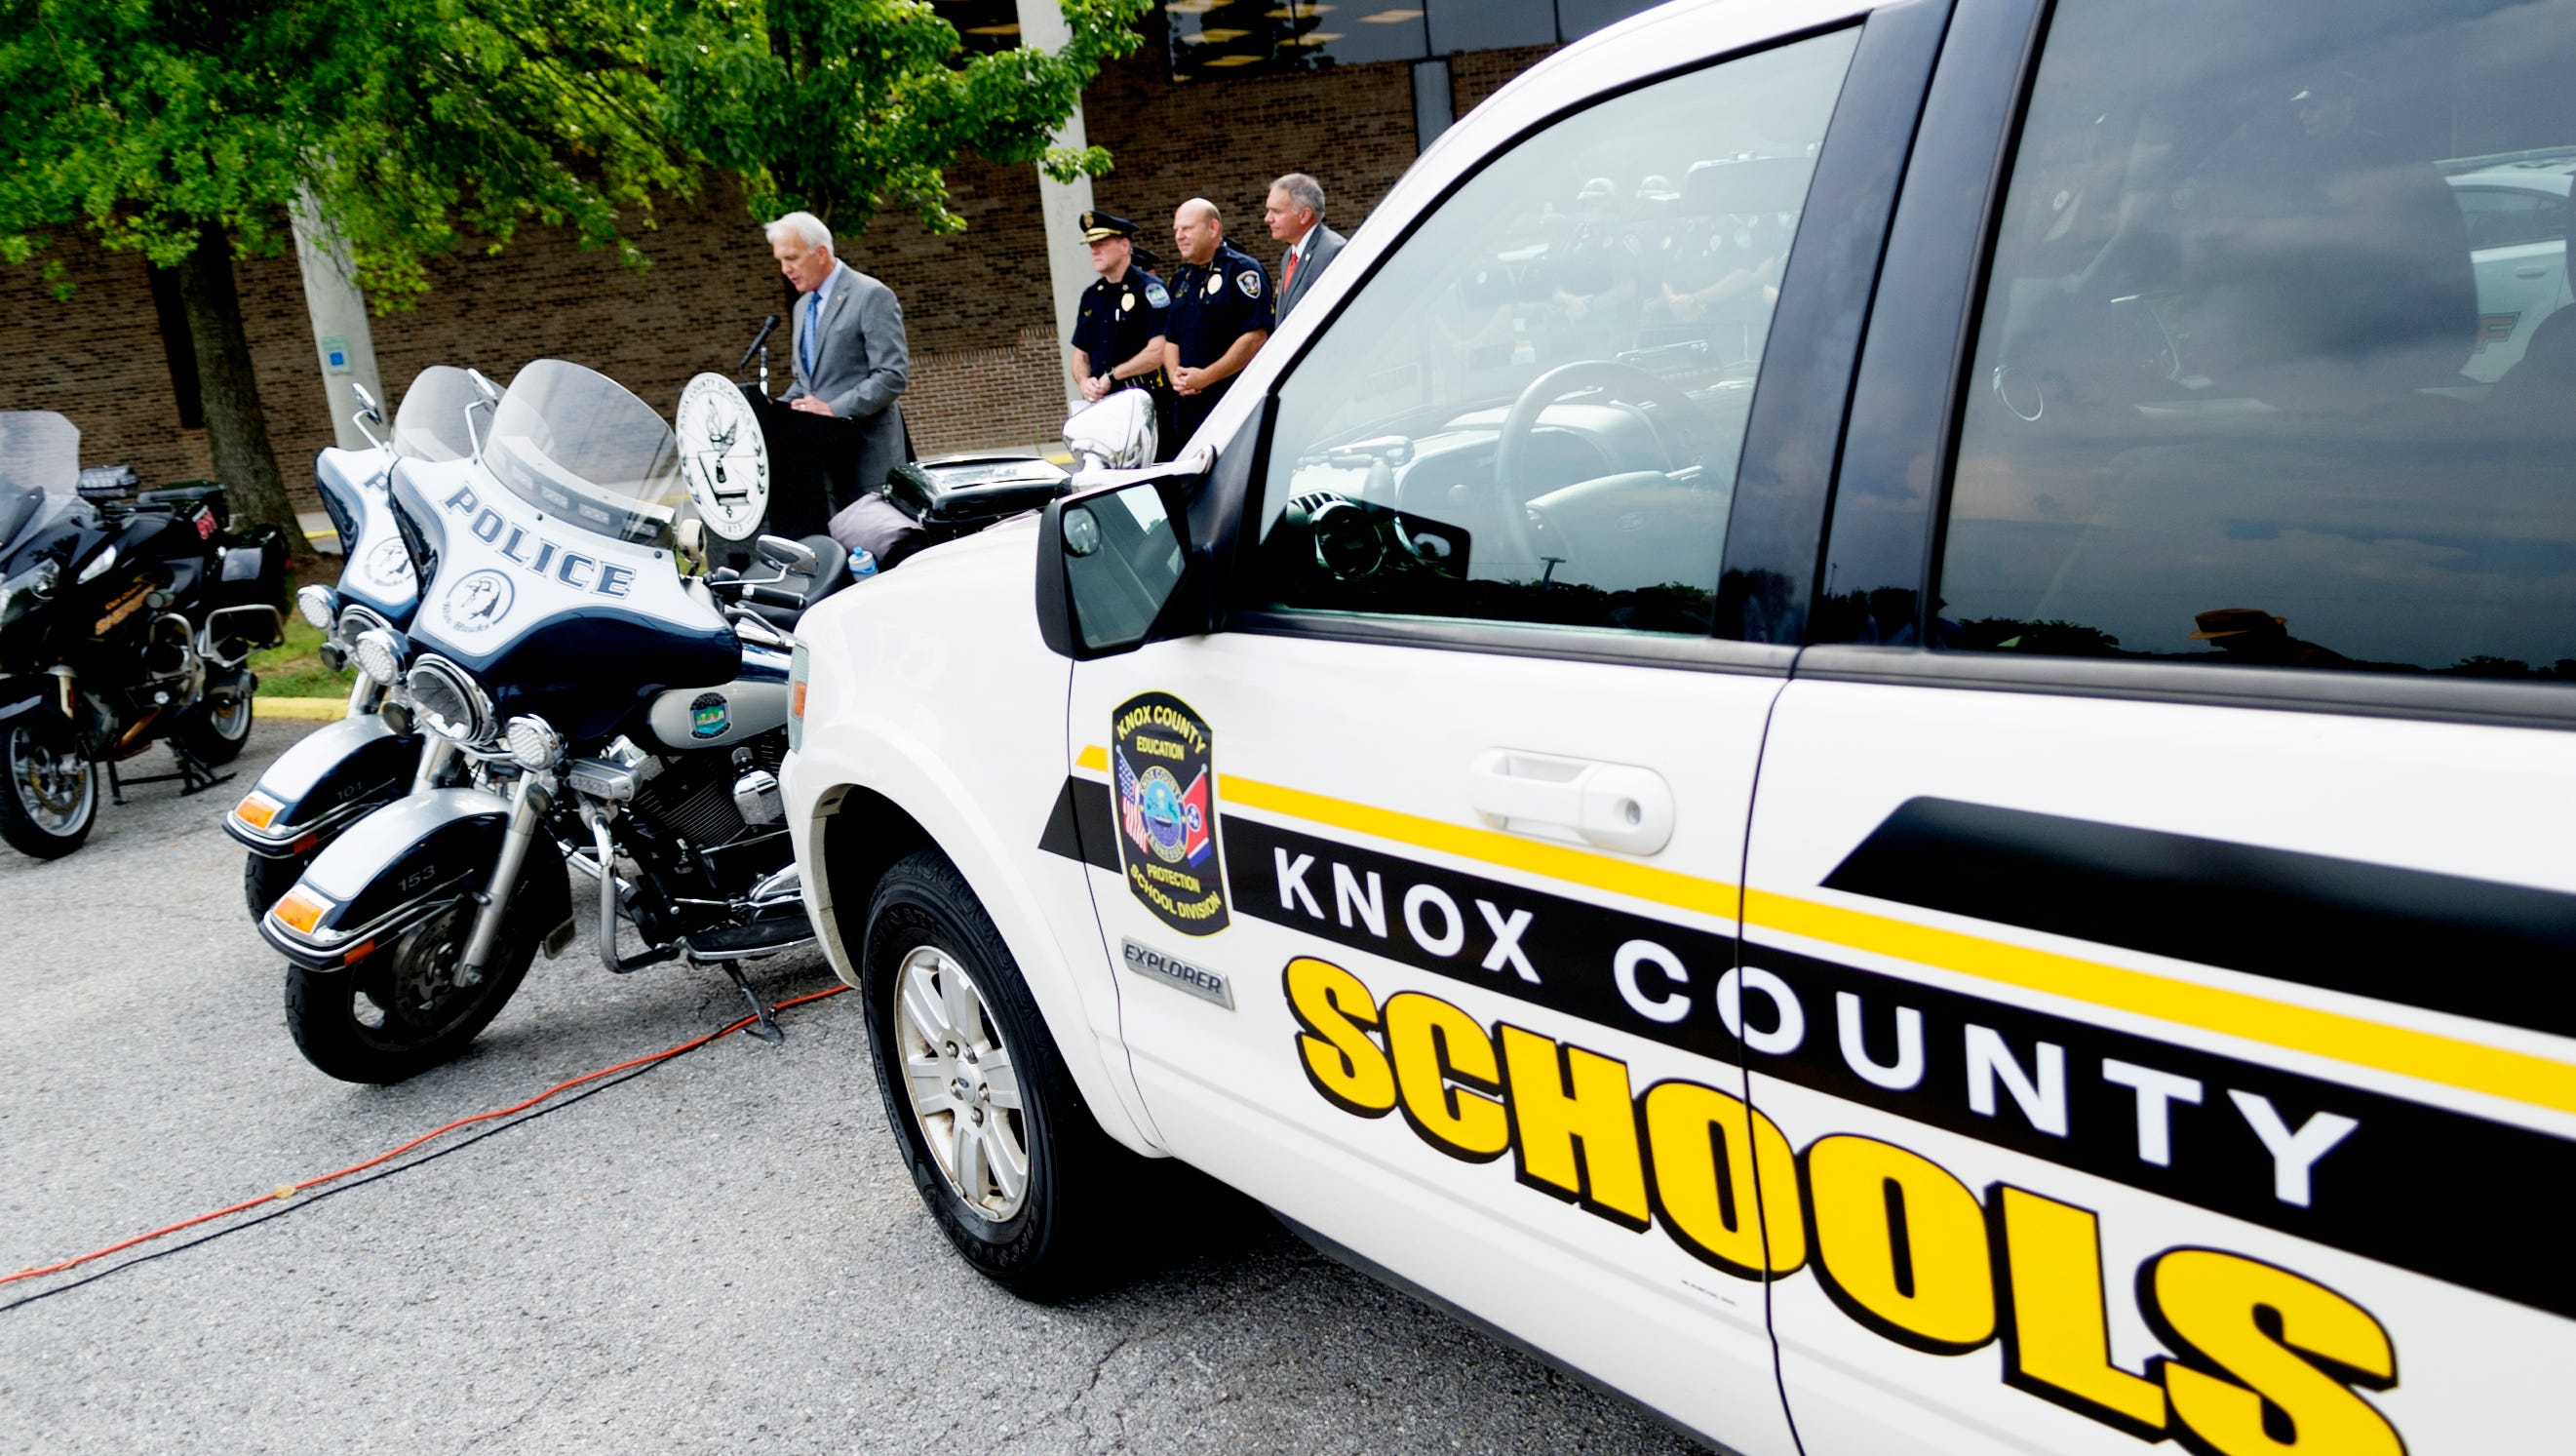 Knox County Schools' new security chief His philosophy and salary